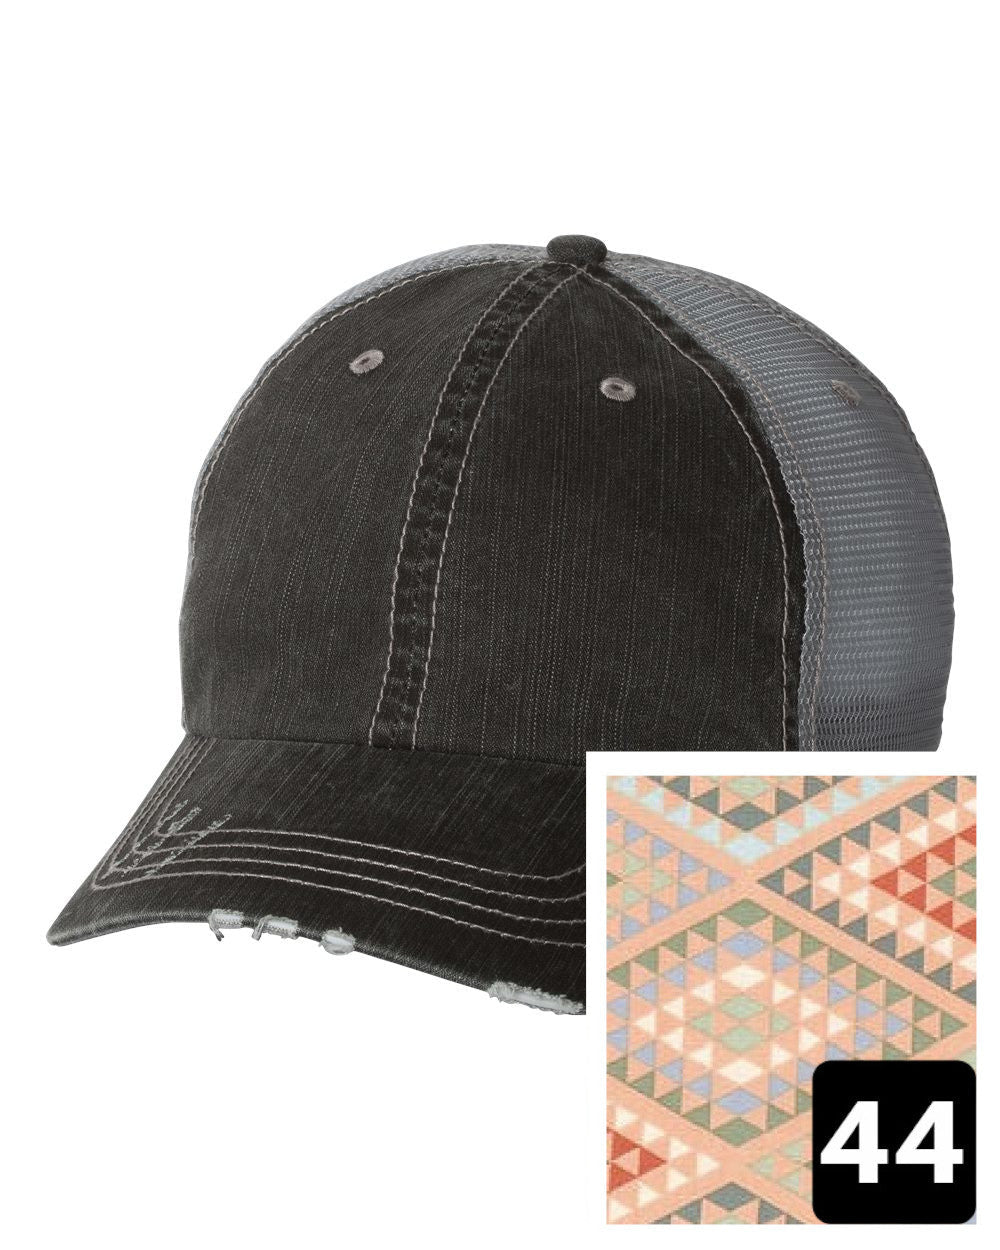 gray distressed trucker hat with black geometric fabric state of Maine